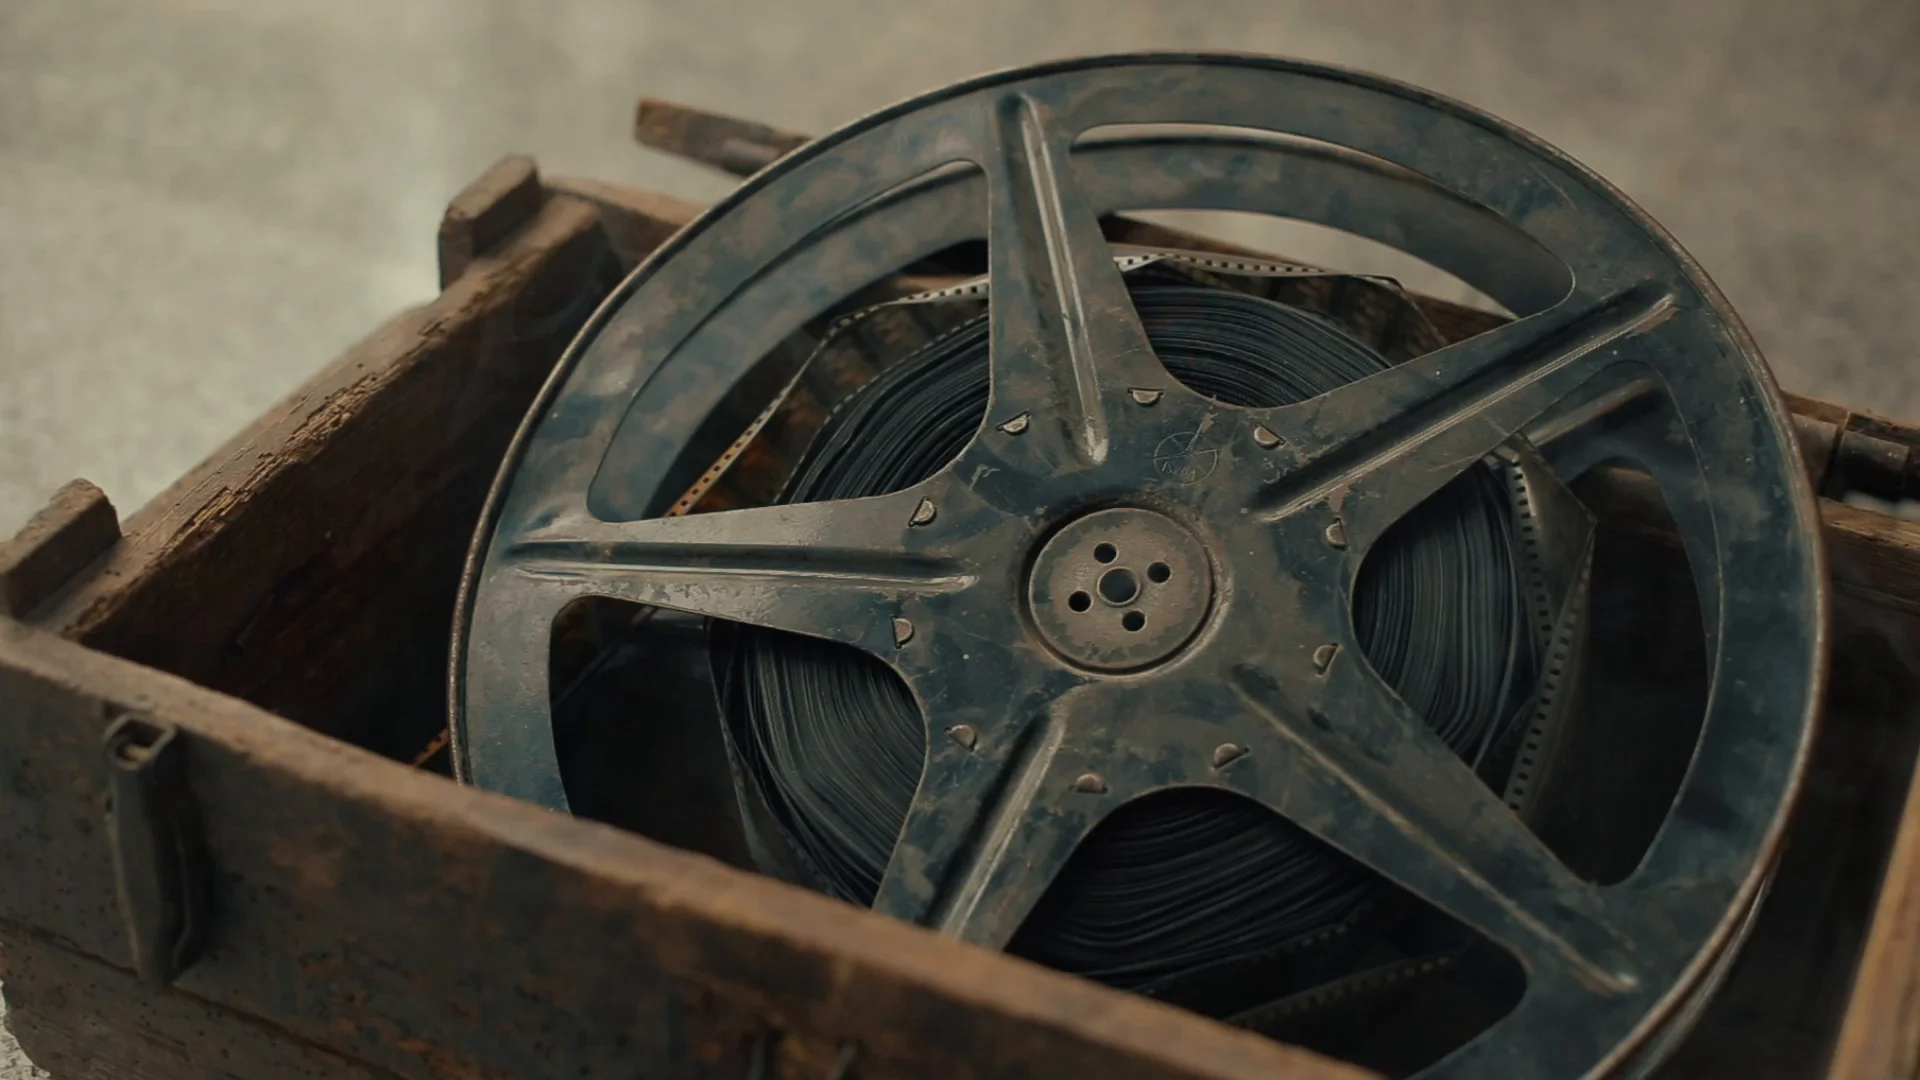 Film reel in a vintage wooden box, Stock Video